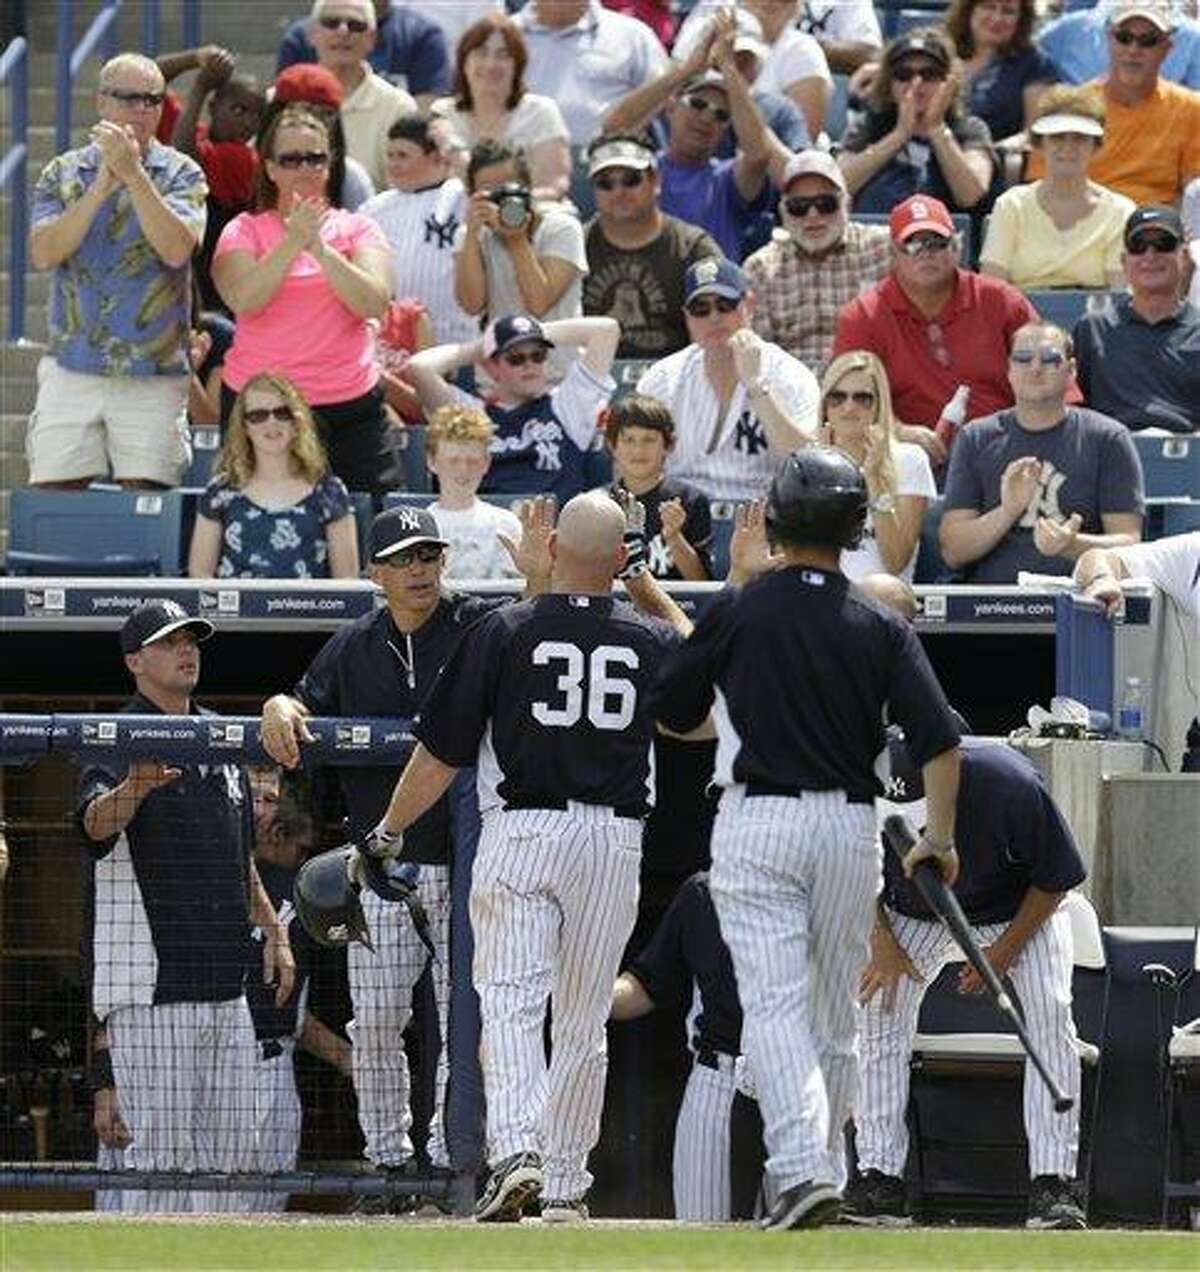 Fans and New York Yankees manager Joe Girardi greet and applaud Yankees Kevin Youkilis (36) after Youkilis hit a solo home run in a spring training baseball game in Tampa, Fla., Monday, March 11, 2013. (AP Photo/Kathy Willens)